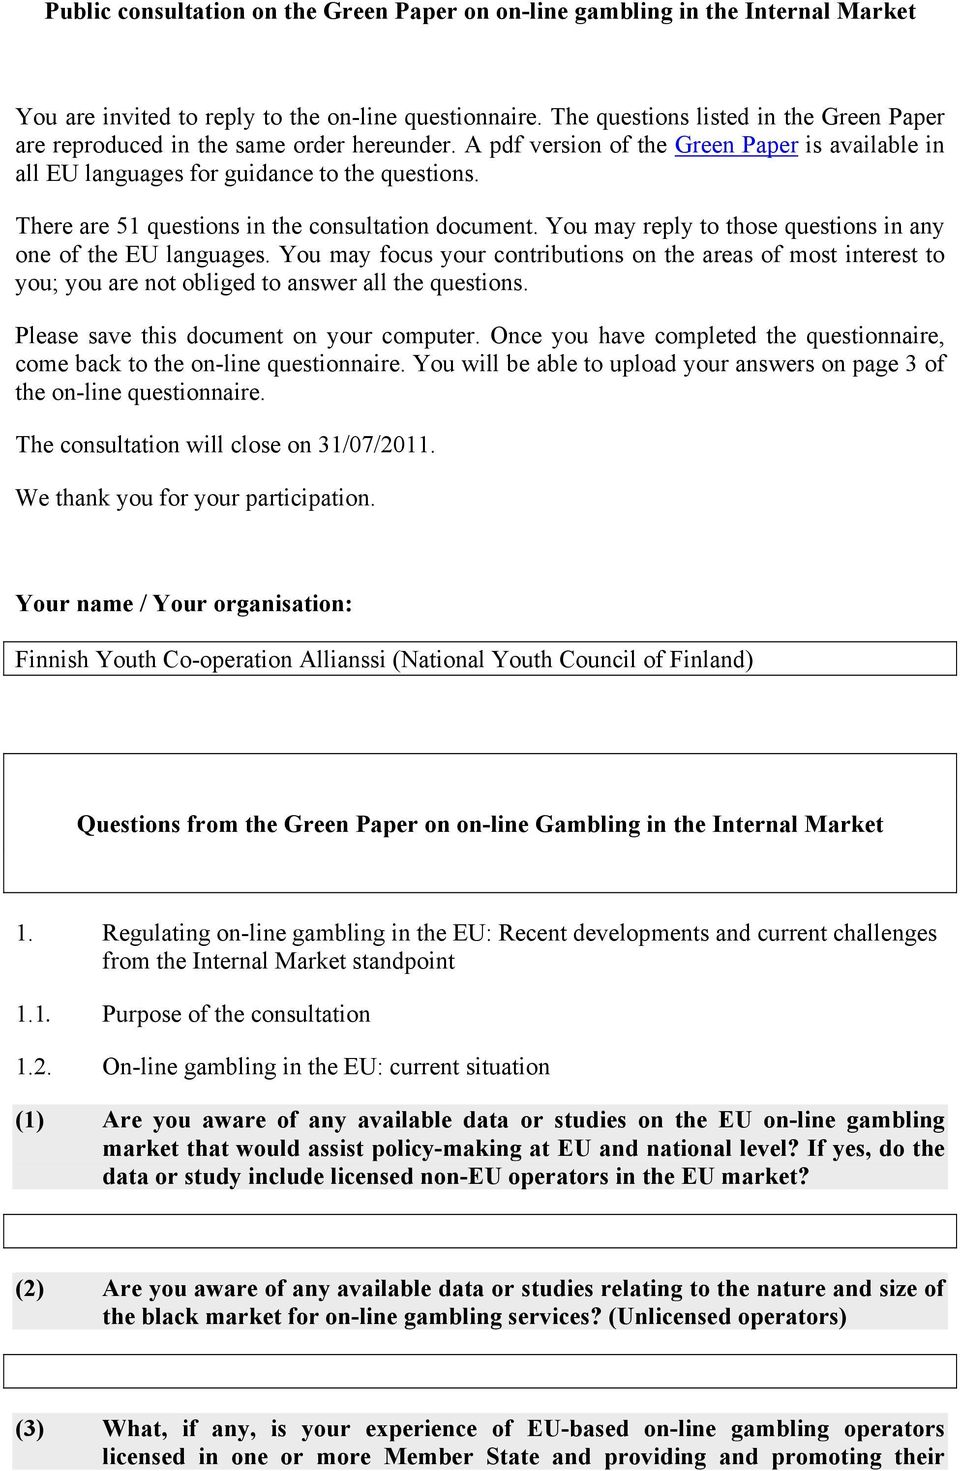 There are 51 questions in the consultation document. You may reply to those questions in any one of the EU languages.